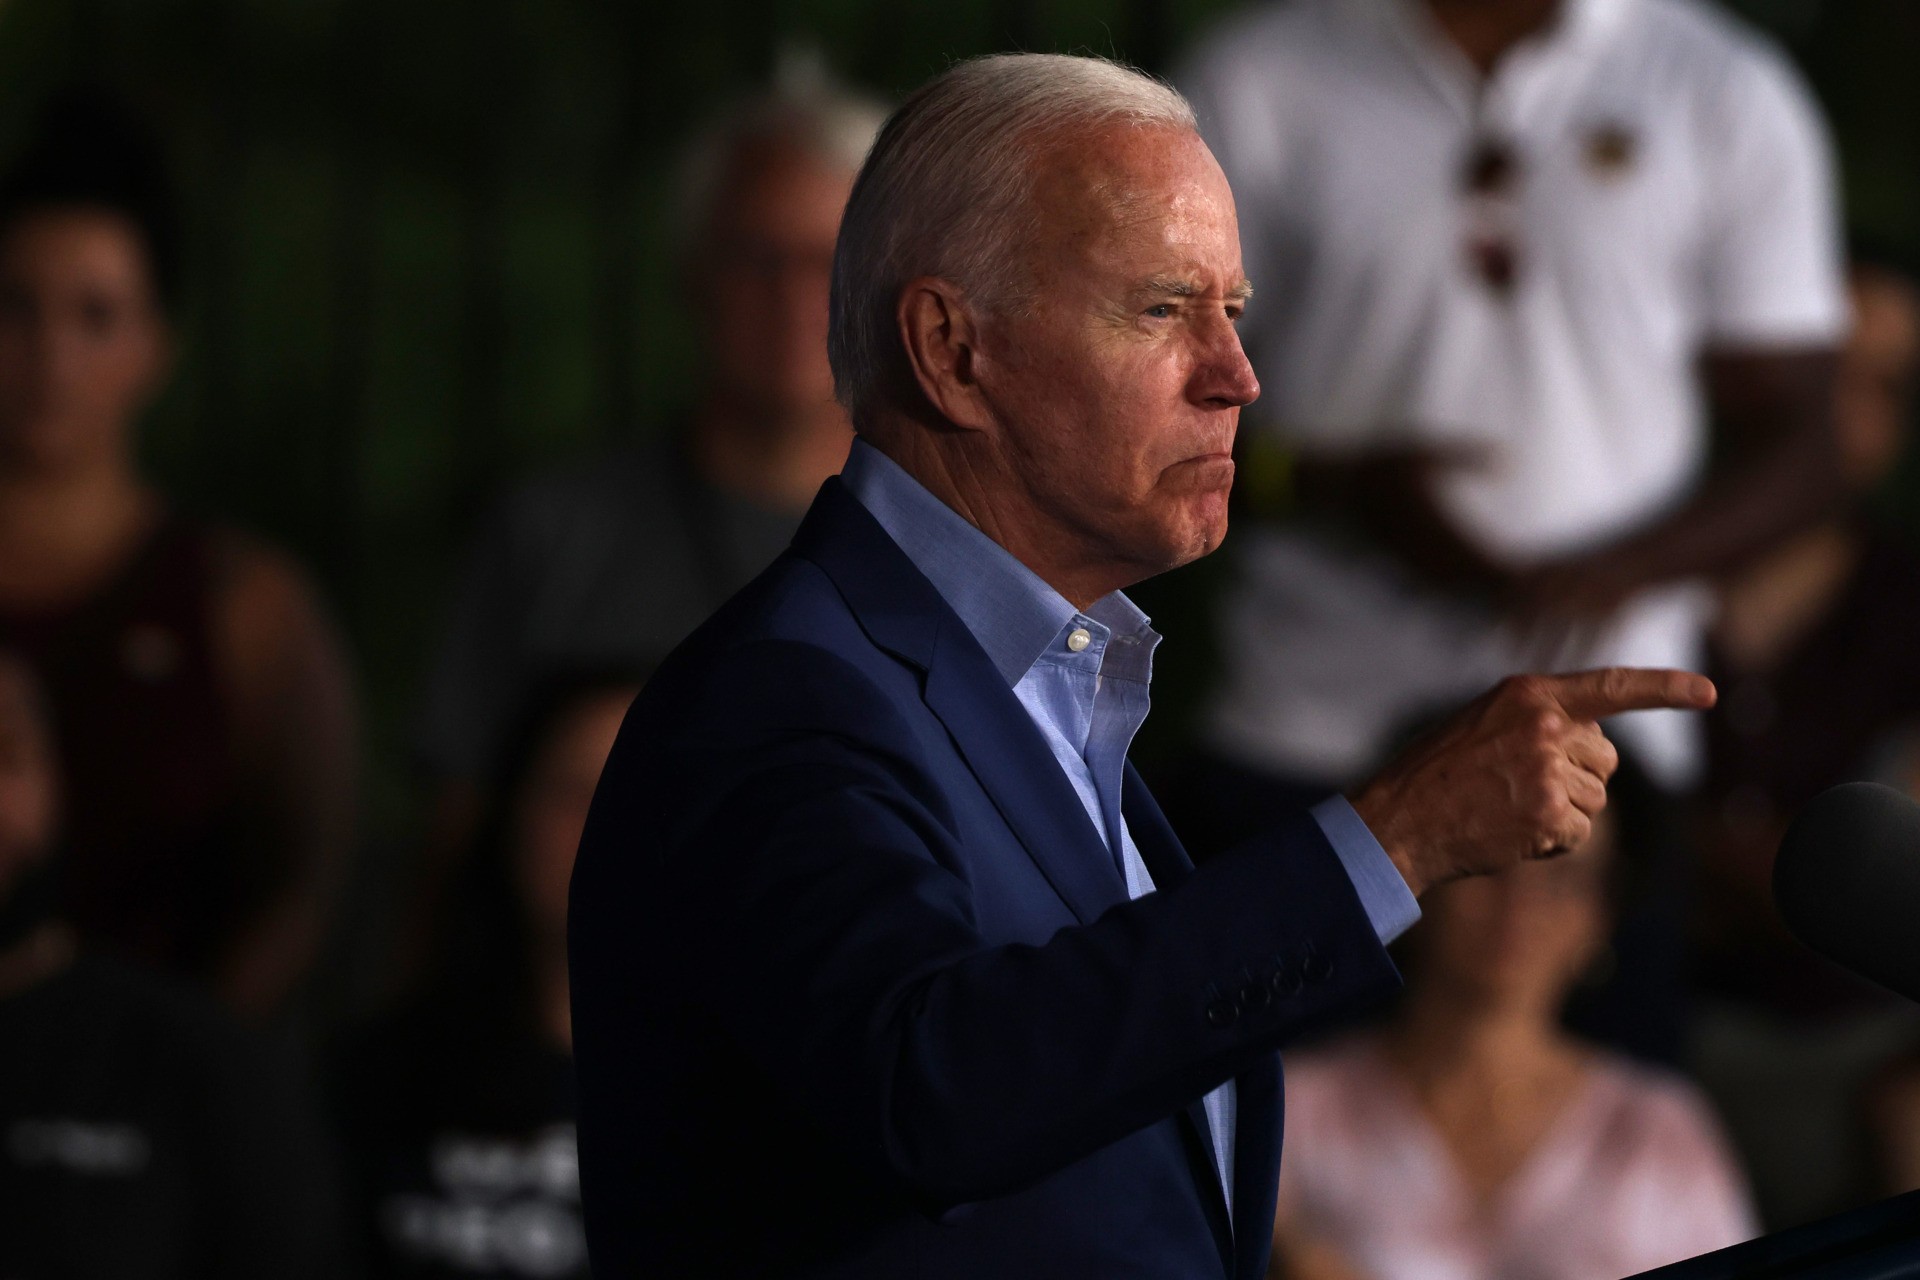 ARLINGTON, VIRGINIA - JULY 23: U.S. President Joe Biden gestures as he speaks at a campaign event for Virginia gubernatorial candidate Terry McAuliffe (D-VA) at the Lubber Run Community Center on July 22, 2021 in Arlington, Virginia. President Biden joined McCauliffe to help campaign, marking the President’s return to the campaign trail since he entered the White House. (Photo by Anna Moneymaker/Getty Images)